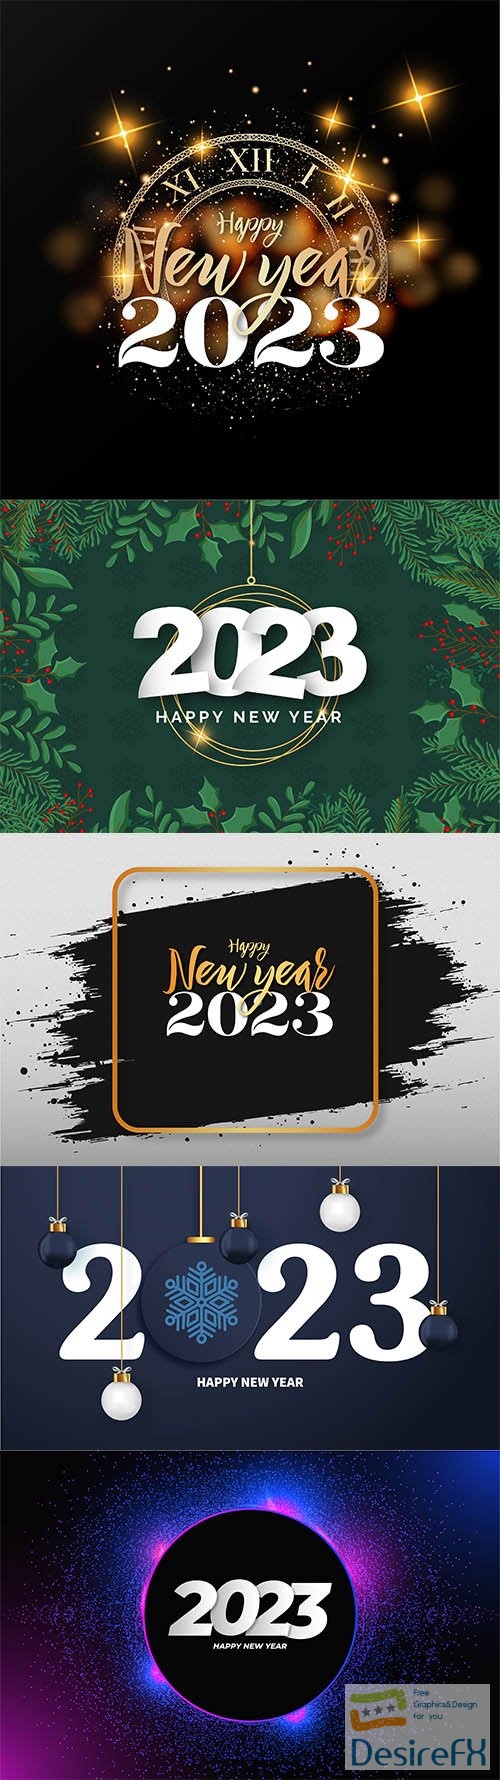 2023 New Year, abstract holiday design on vector background